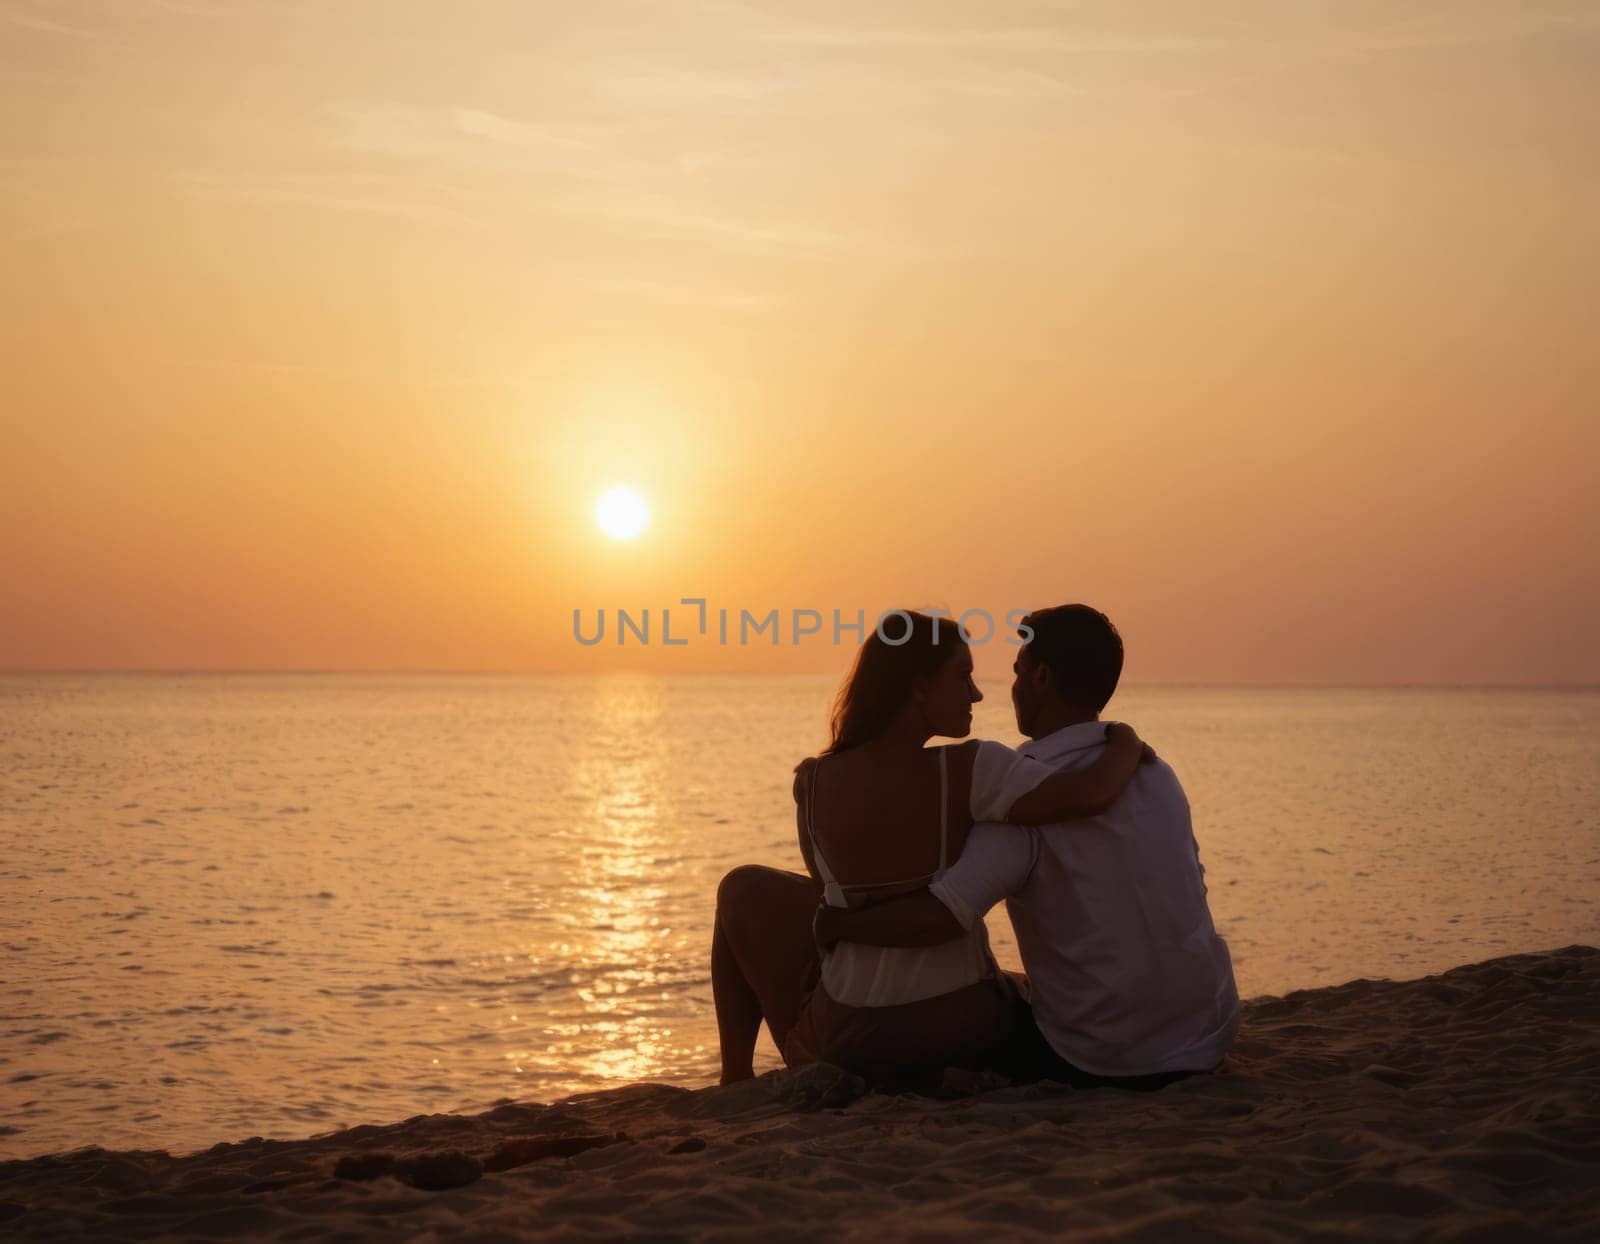 A romantic couple sitting on the beach at sunset, with the sun setting over the horizon and the ocean in the background